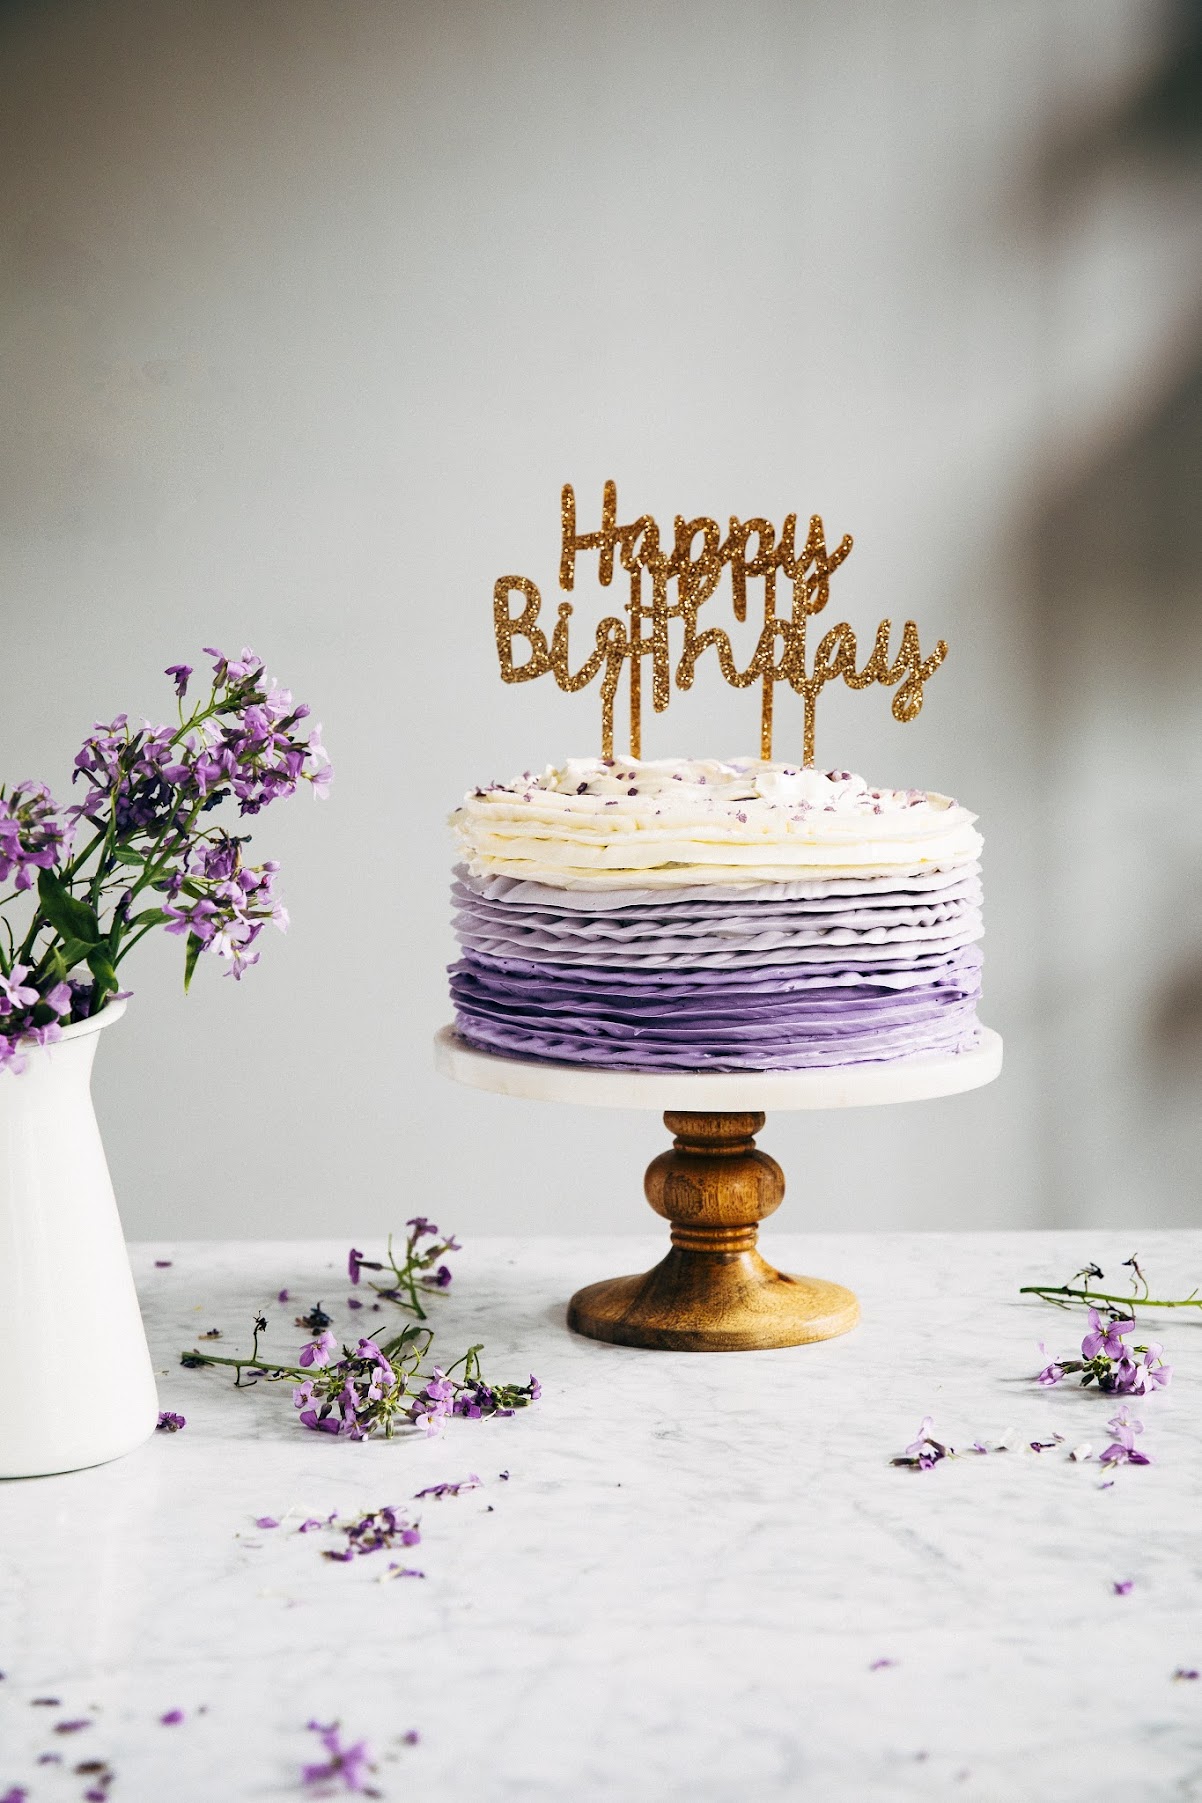 30th birthday chocolate cake with lavender ruffle frosting